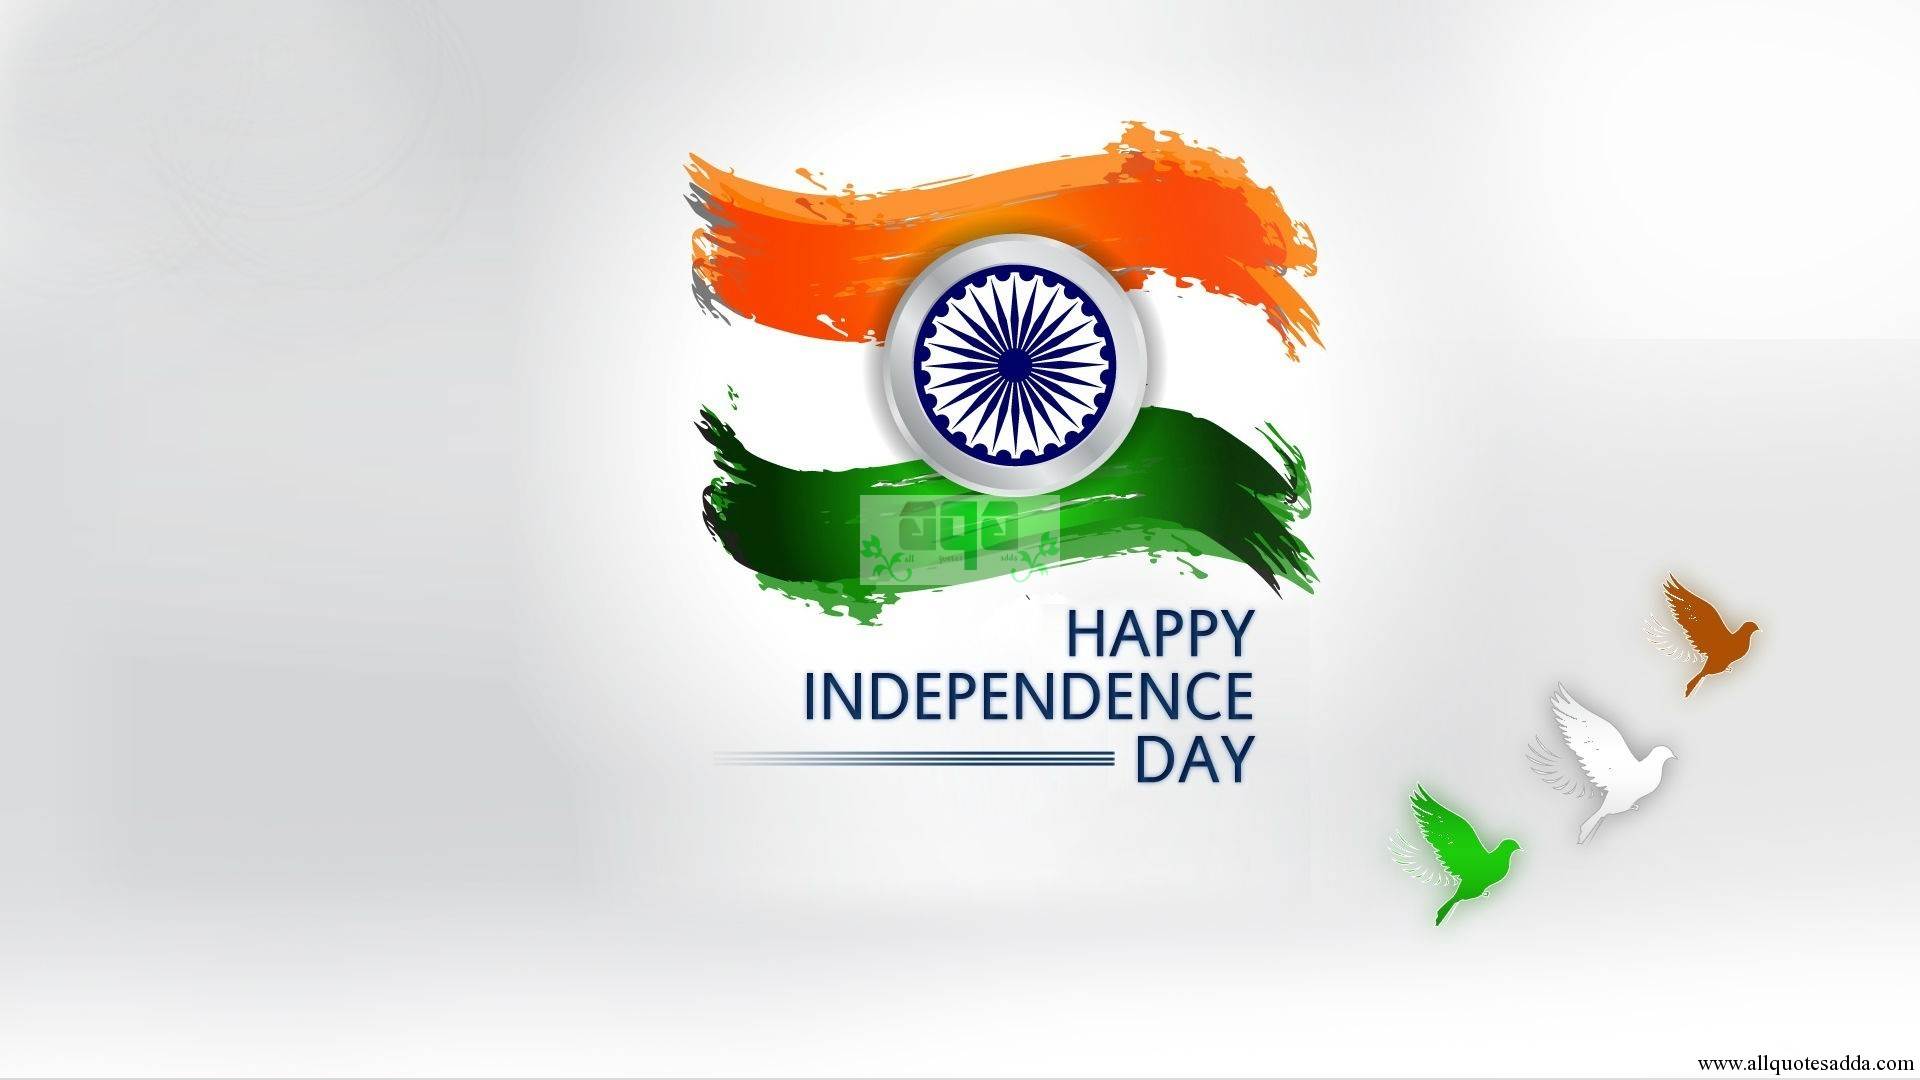 Happy Independence Day Image Wallpaper Picture For Facebook